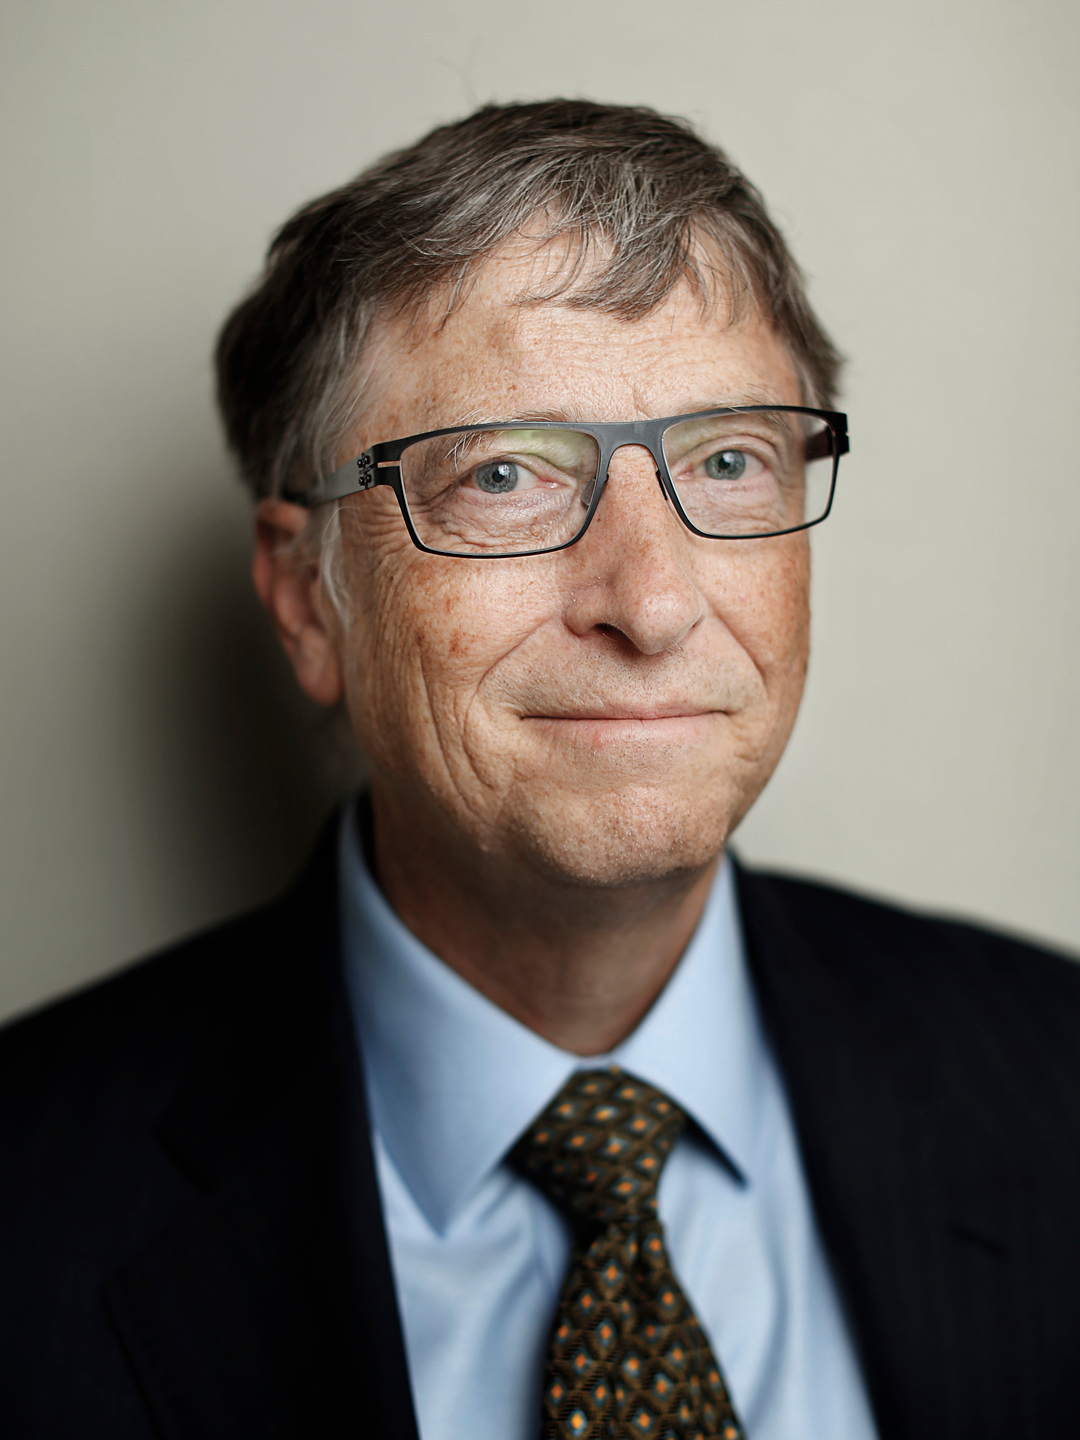 Bill Gates who is his father